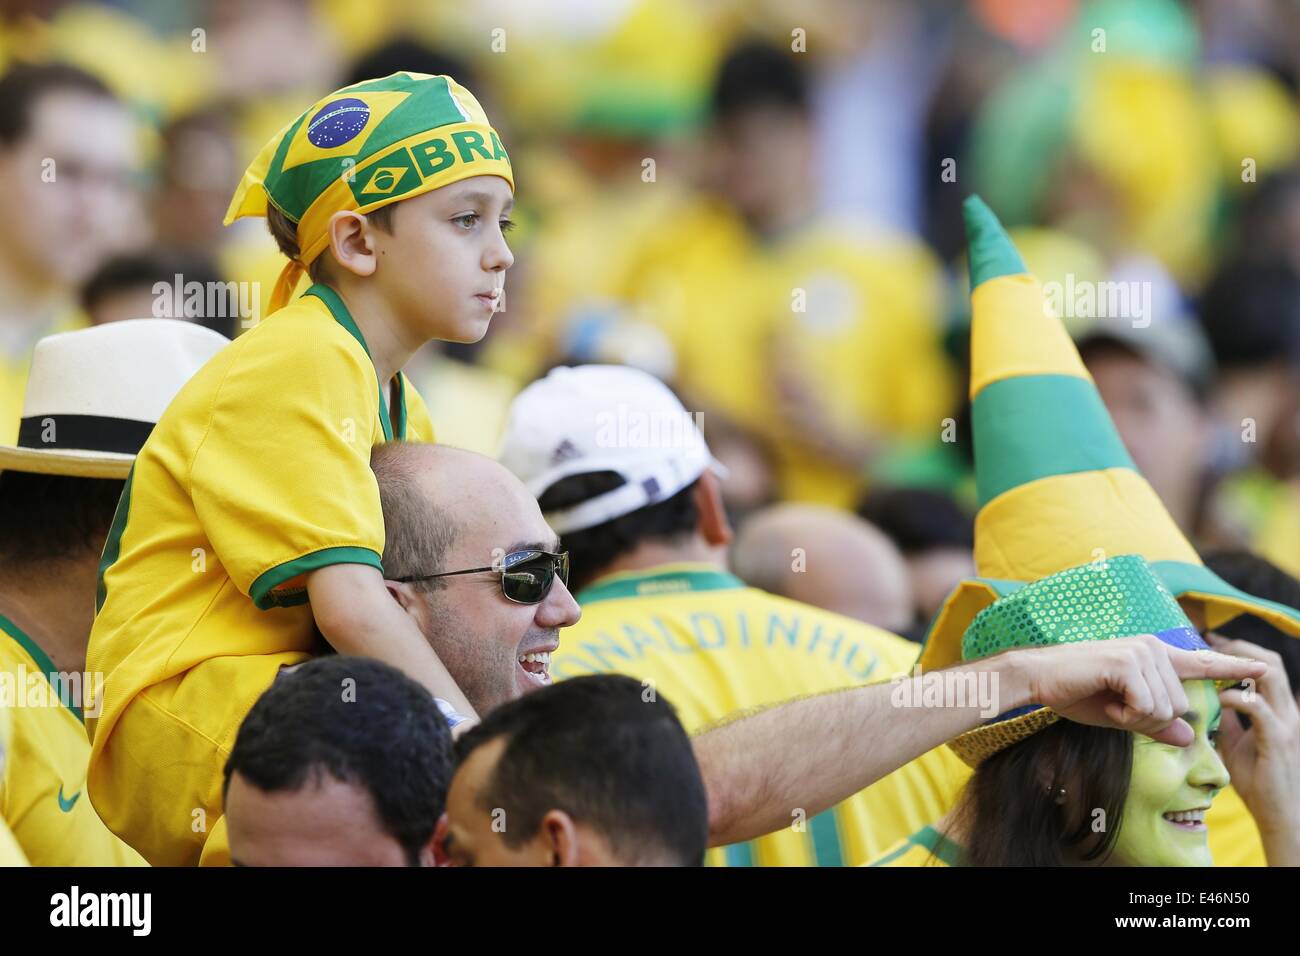 Belo Horizonte, Brazil. 28th June, 2014. Brazil kids fans (BRA)  Football/Soccer : FIFA World Cup Brazil 2014 round of 16 match between  Brazil and Chile at the Mineirao Stadium in Belo Horizonte